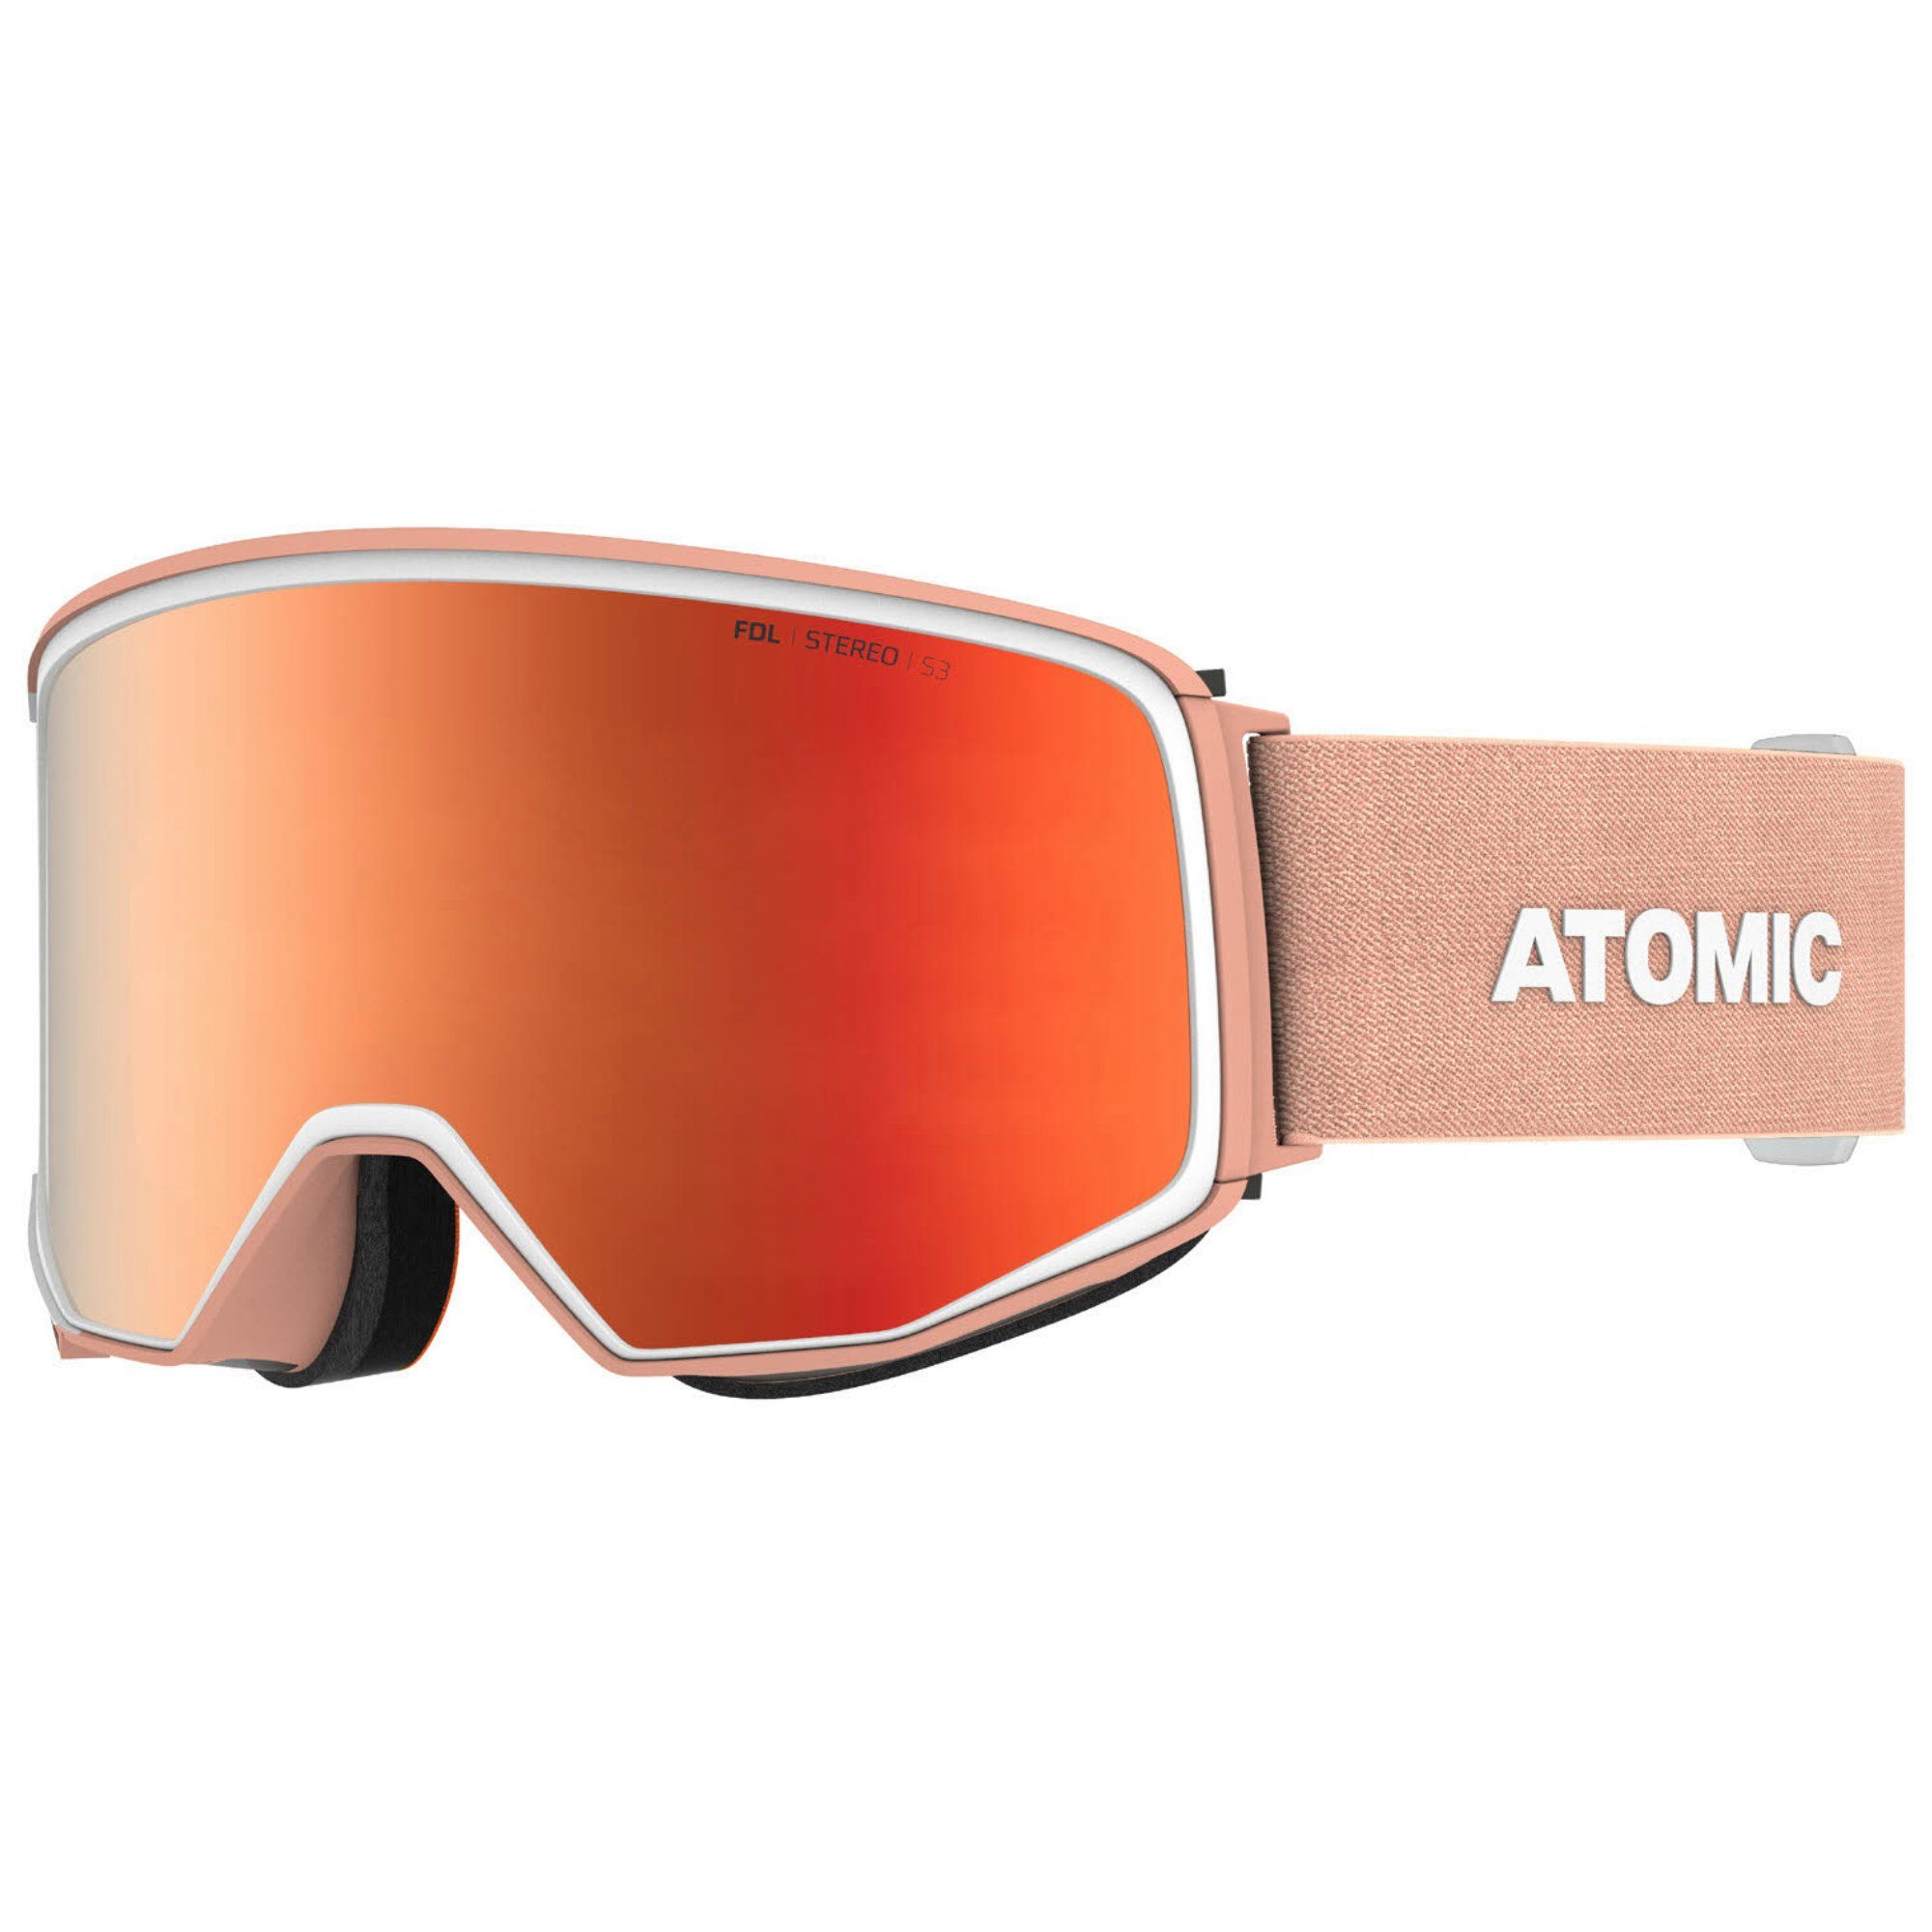 Atomic Snowboardbrille Four Q Stereo - Skibrille - Peach/All Weather